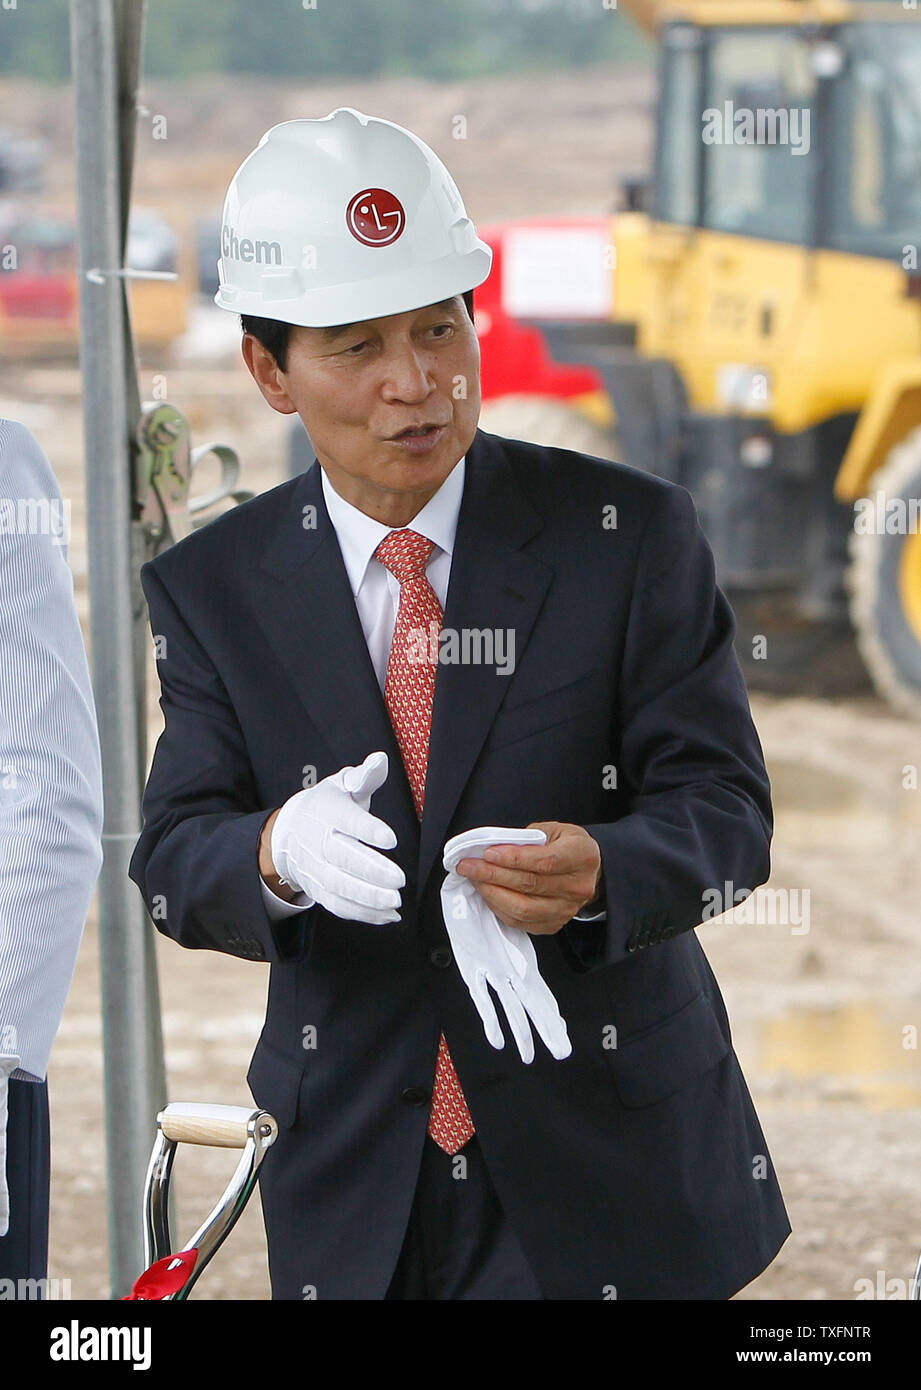 LG Chem Ltd. Vice-chairman and CEO Peter Bahn-Suk Kim prepares to toss some dirt at a groundbreaking ceremony for a new lithium-ion battery plant in Holland, Michigan on July 15, 2010. The $303 million facility run by LG Chem and Compact Power, Inc. is scheduled for completion in 2012 and is partially financed by a $151.4 million grant from the federal government as part of the stimulus package.       UPI/Brian Kersey Stock Photo